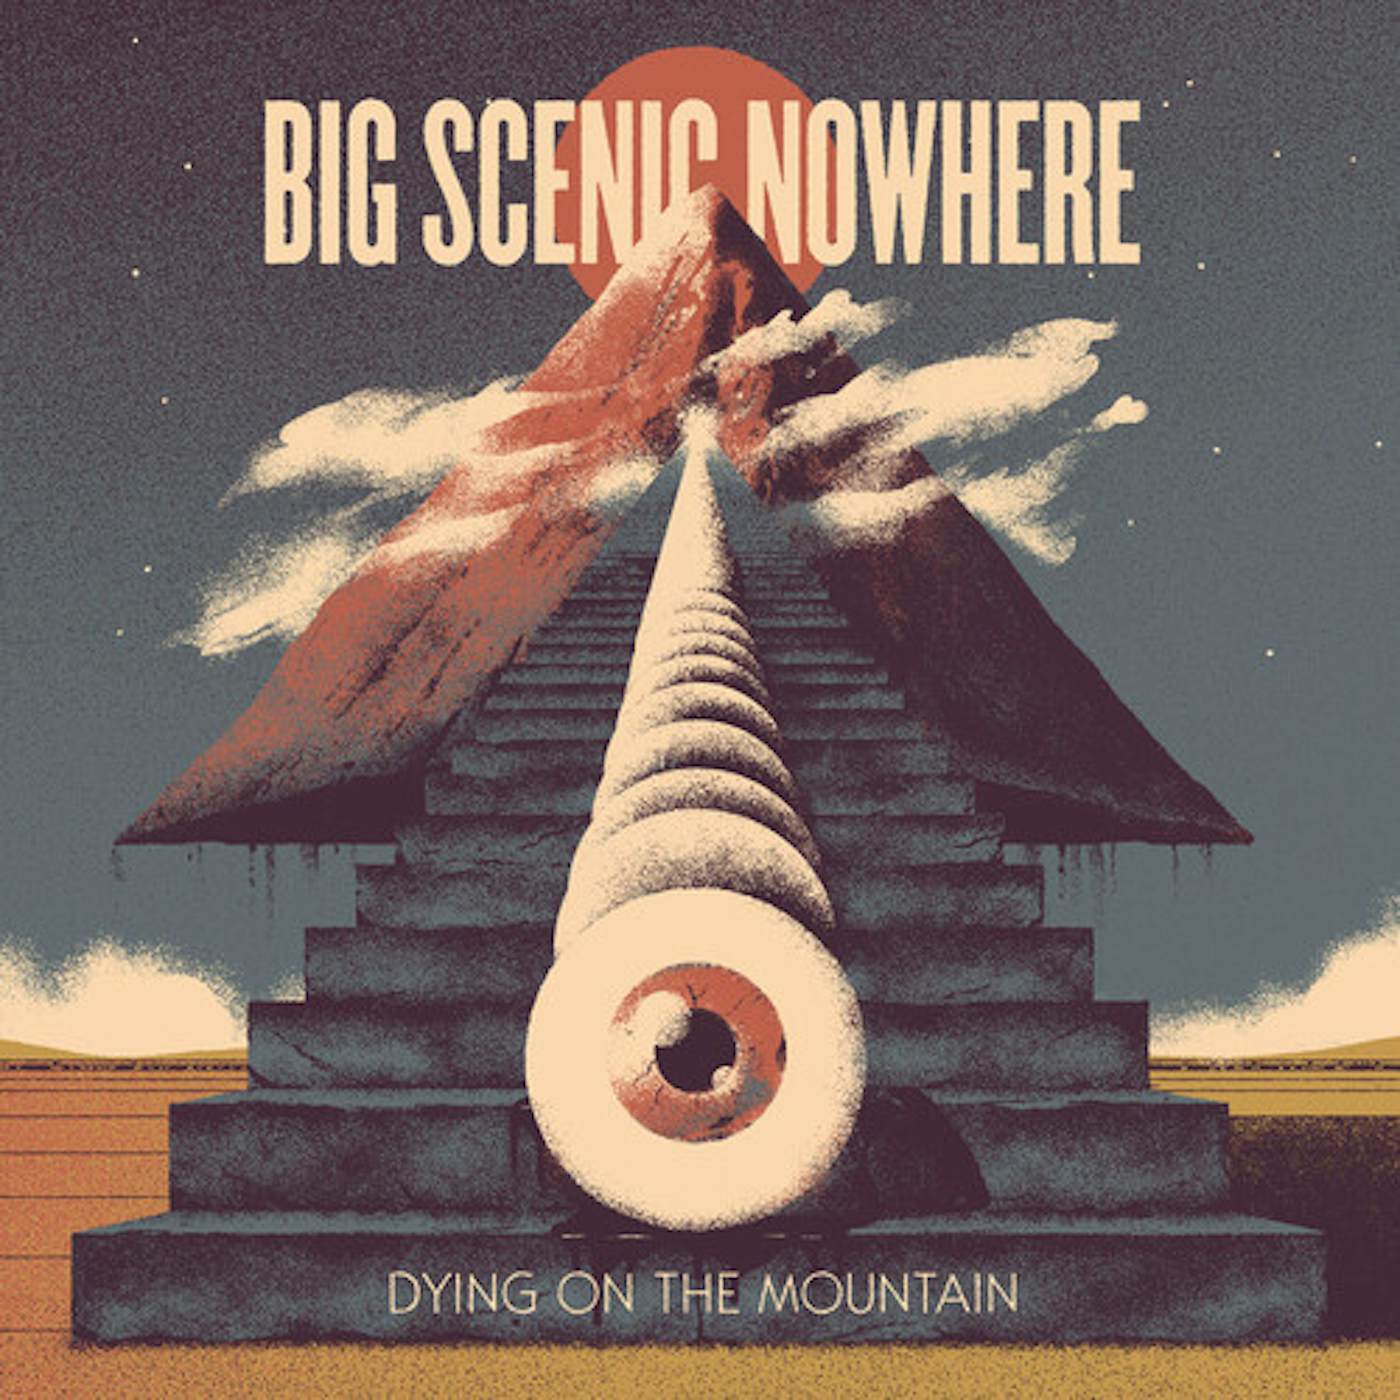 Big Scenic Nowhere DYING ON THE MOUNTAIN CD